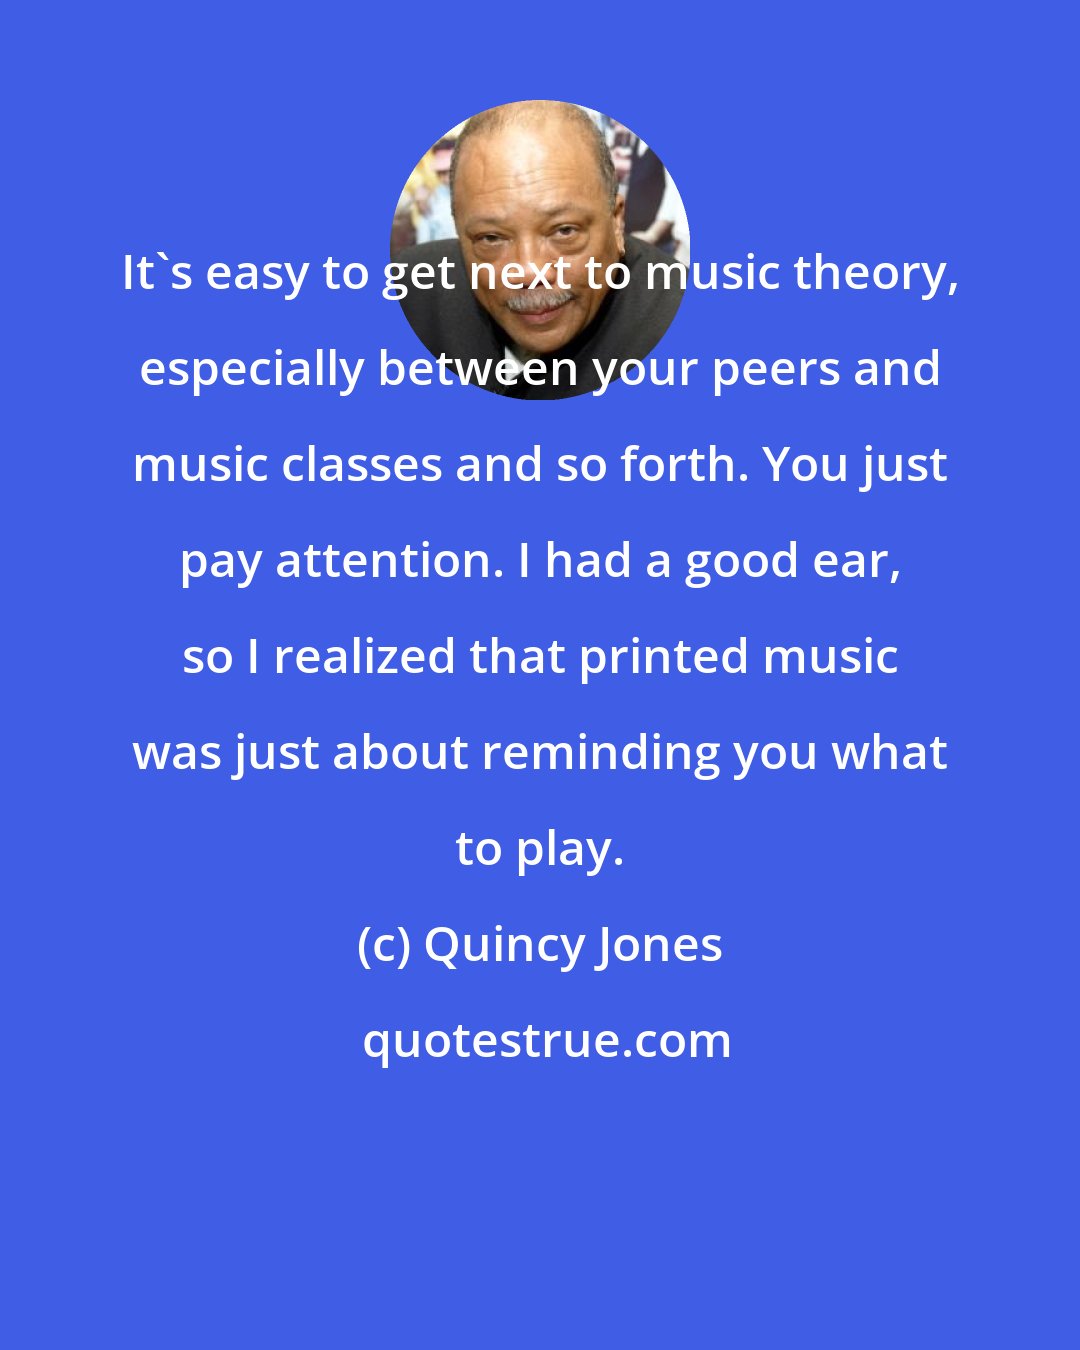 Quincy Jones: It's easy to get next to music theory, especially between your peers and music classes and so forth. You just pay attention. I had a good ear, so I realized that printed music was just about reminding you what to play.